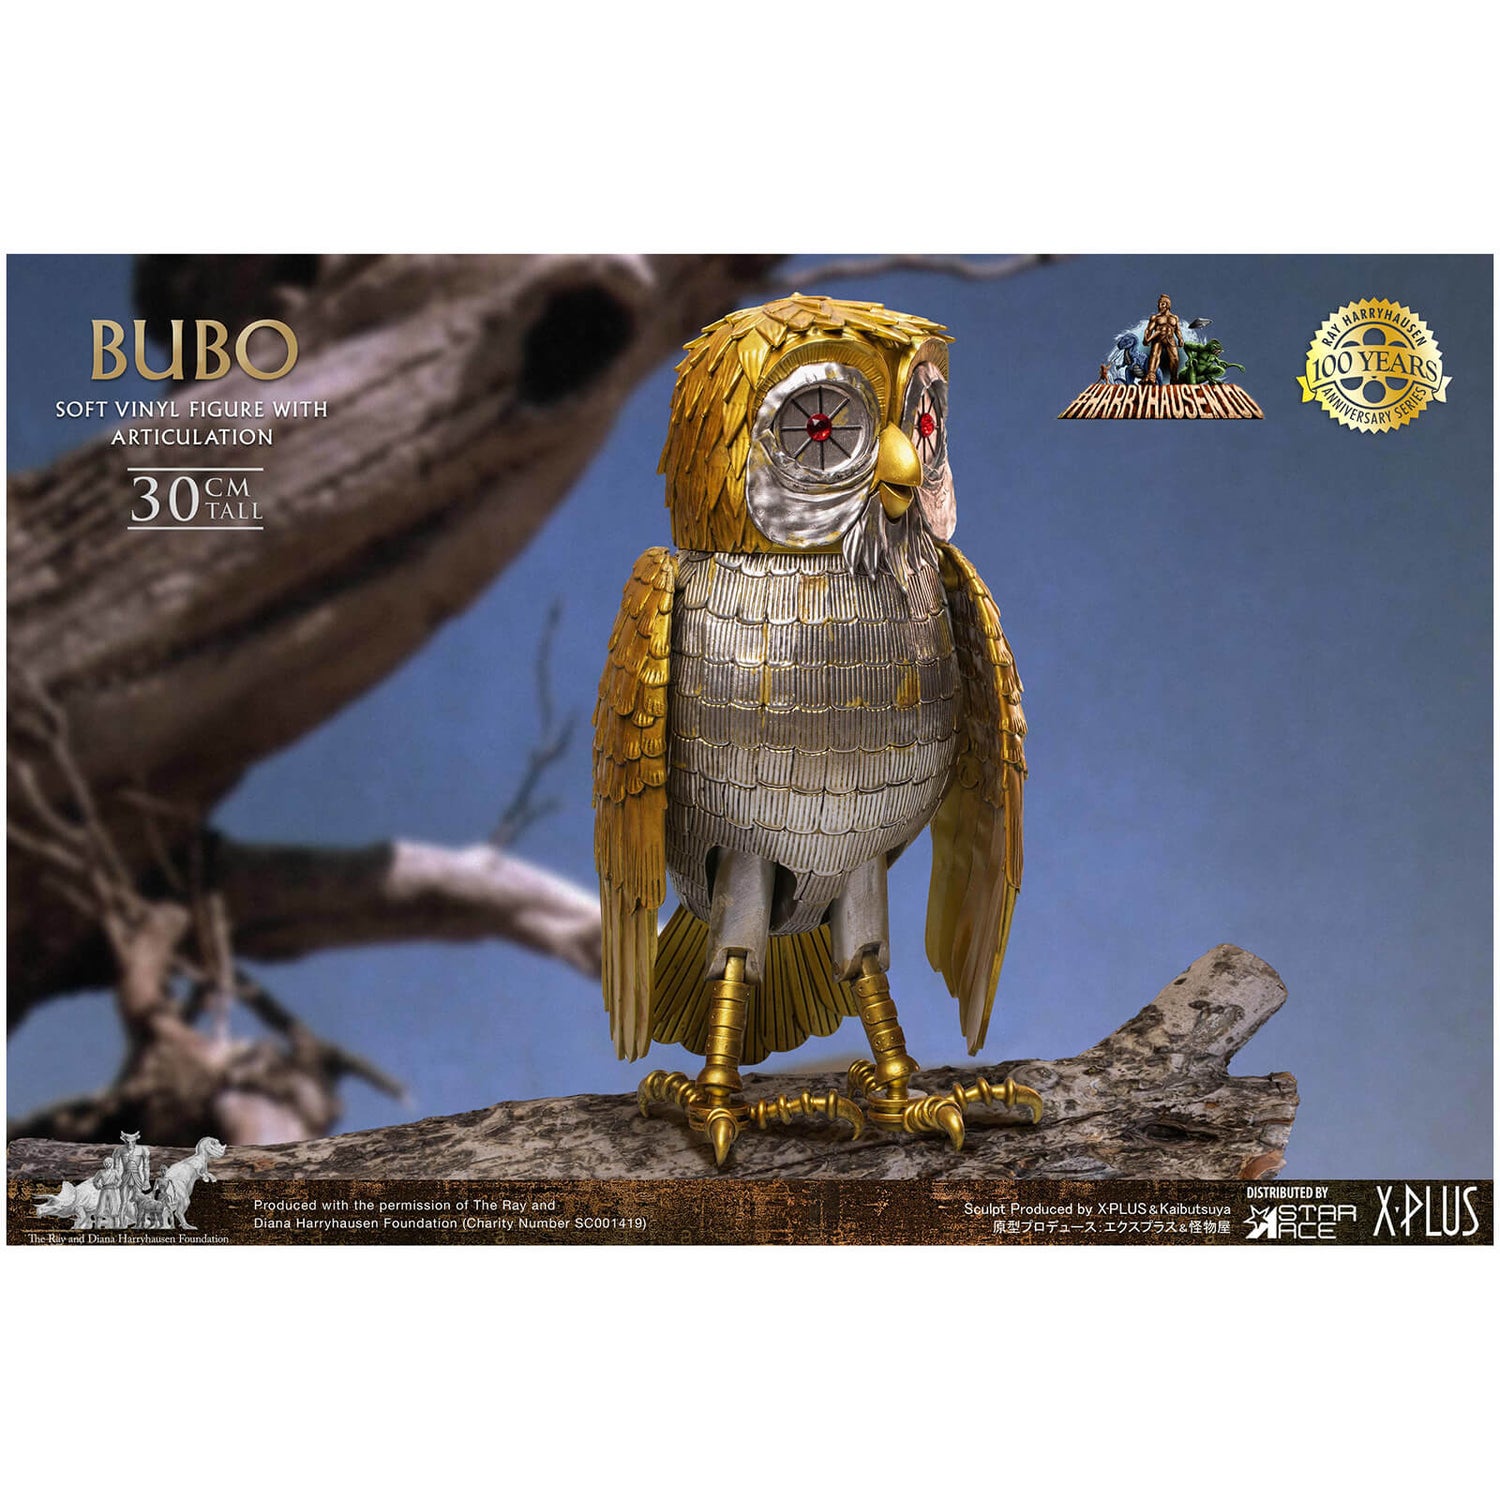 Bubo (Deluxe Version) Vinyl Statue by Star Ace Toys